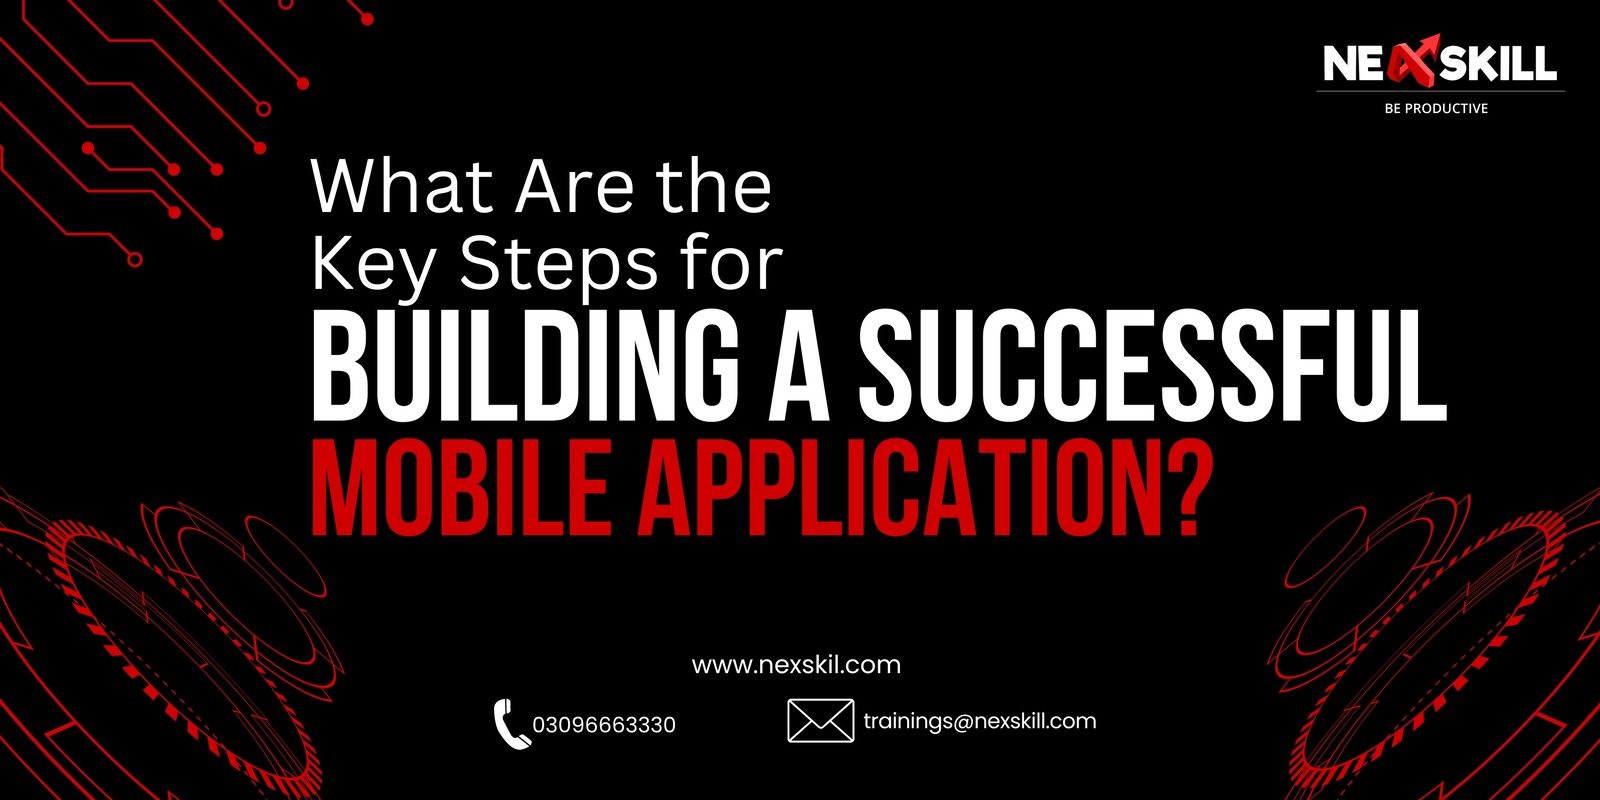 What Are the Key Steps for Building a Successful Mobile Application?